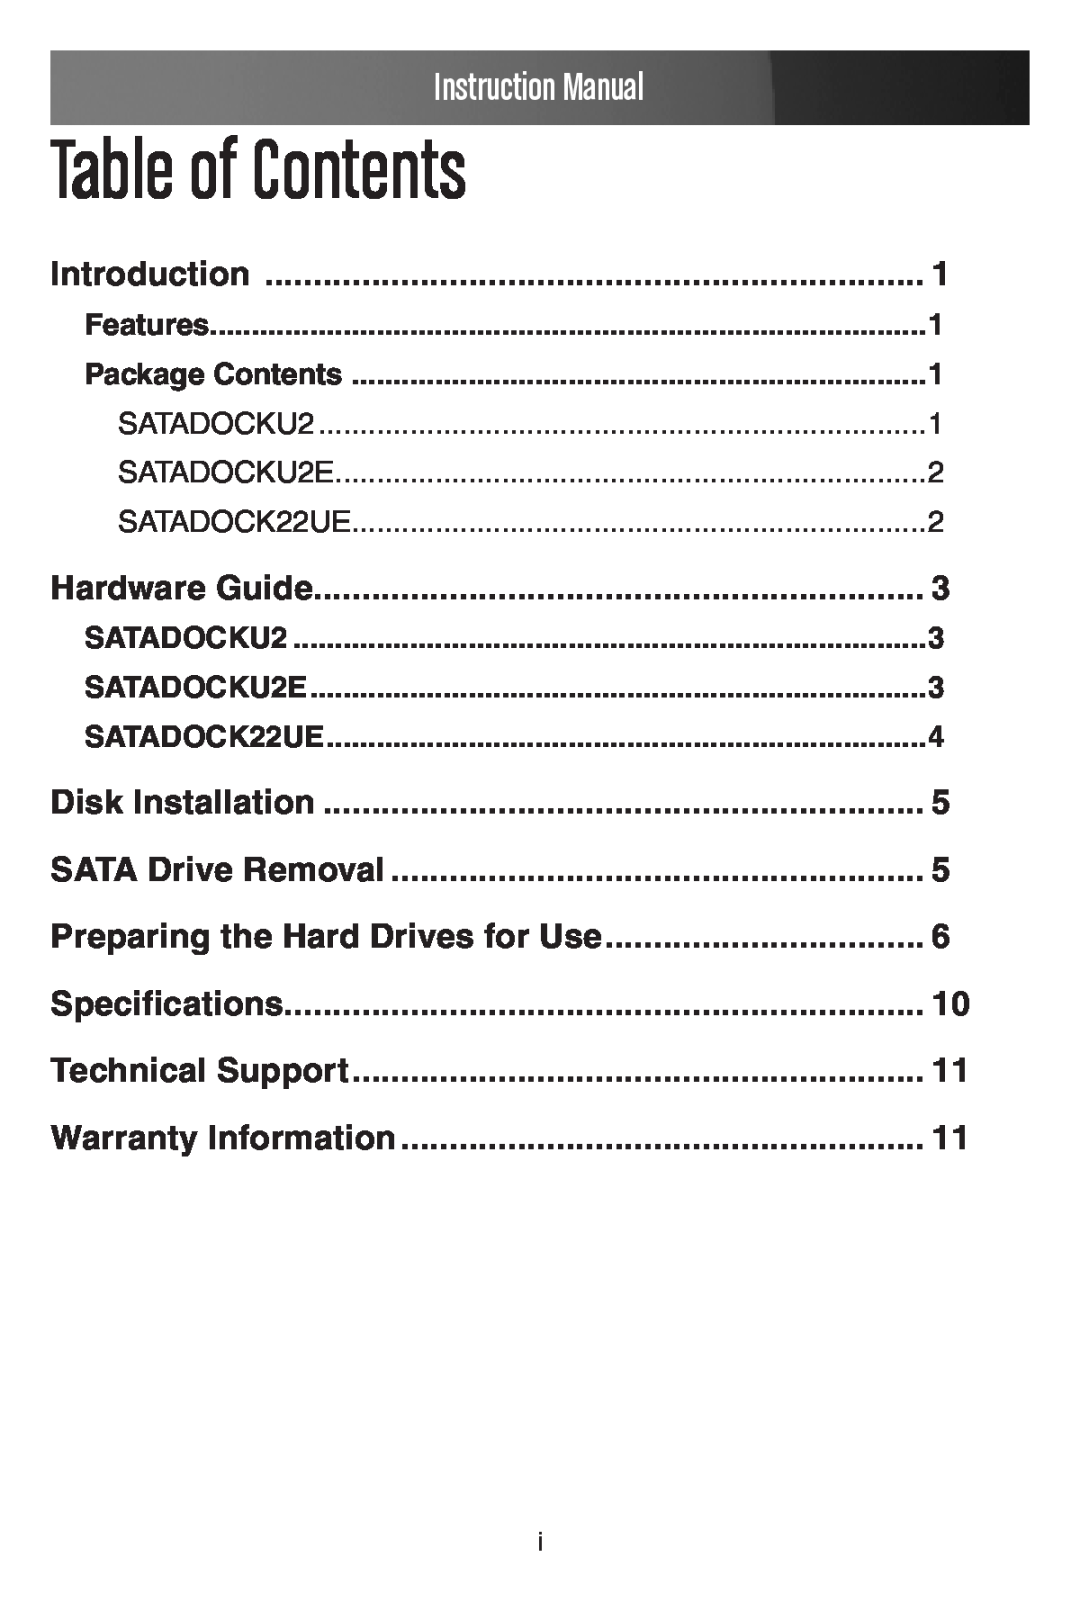 StarTech.com SATADOCKU2 Table of Contents, Instruction Manual, Introduction, Hardware Guide, Disk Installation 